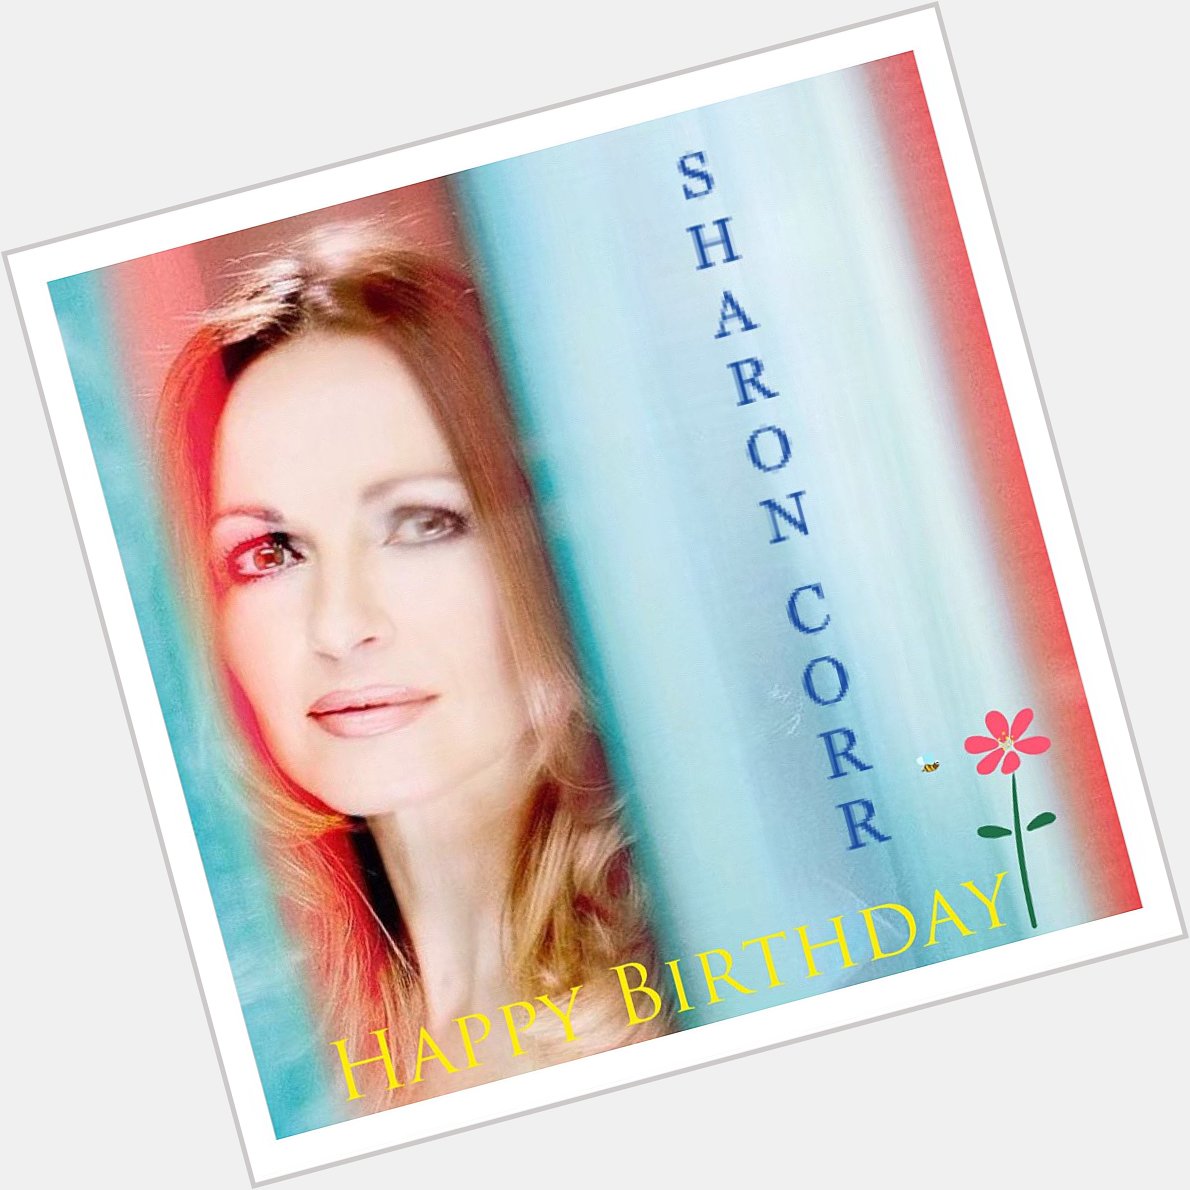 Happy birthday Sharon Corr.
Wish you all the best...       ...24/03/2021   